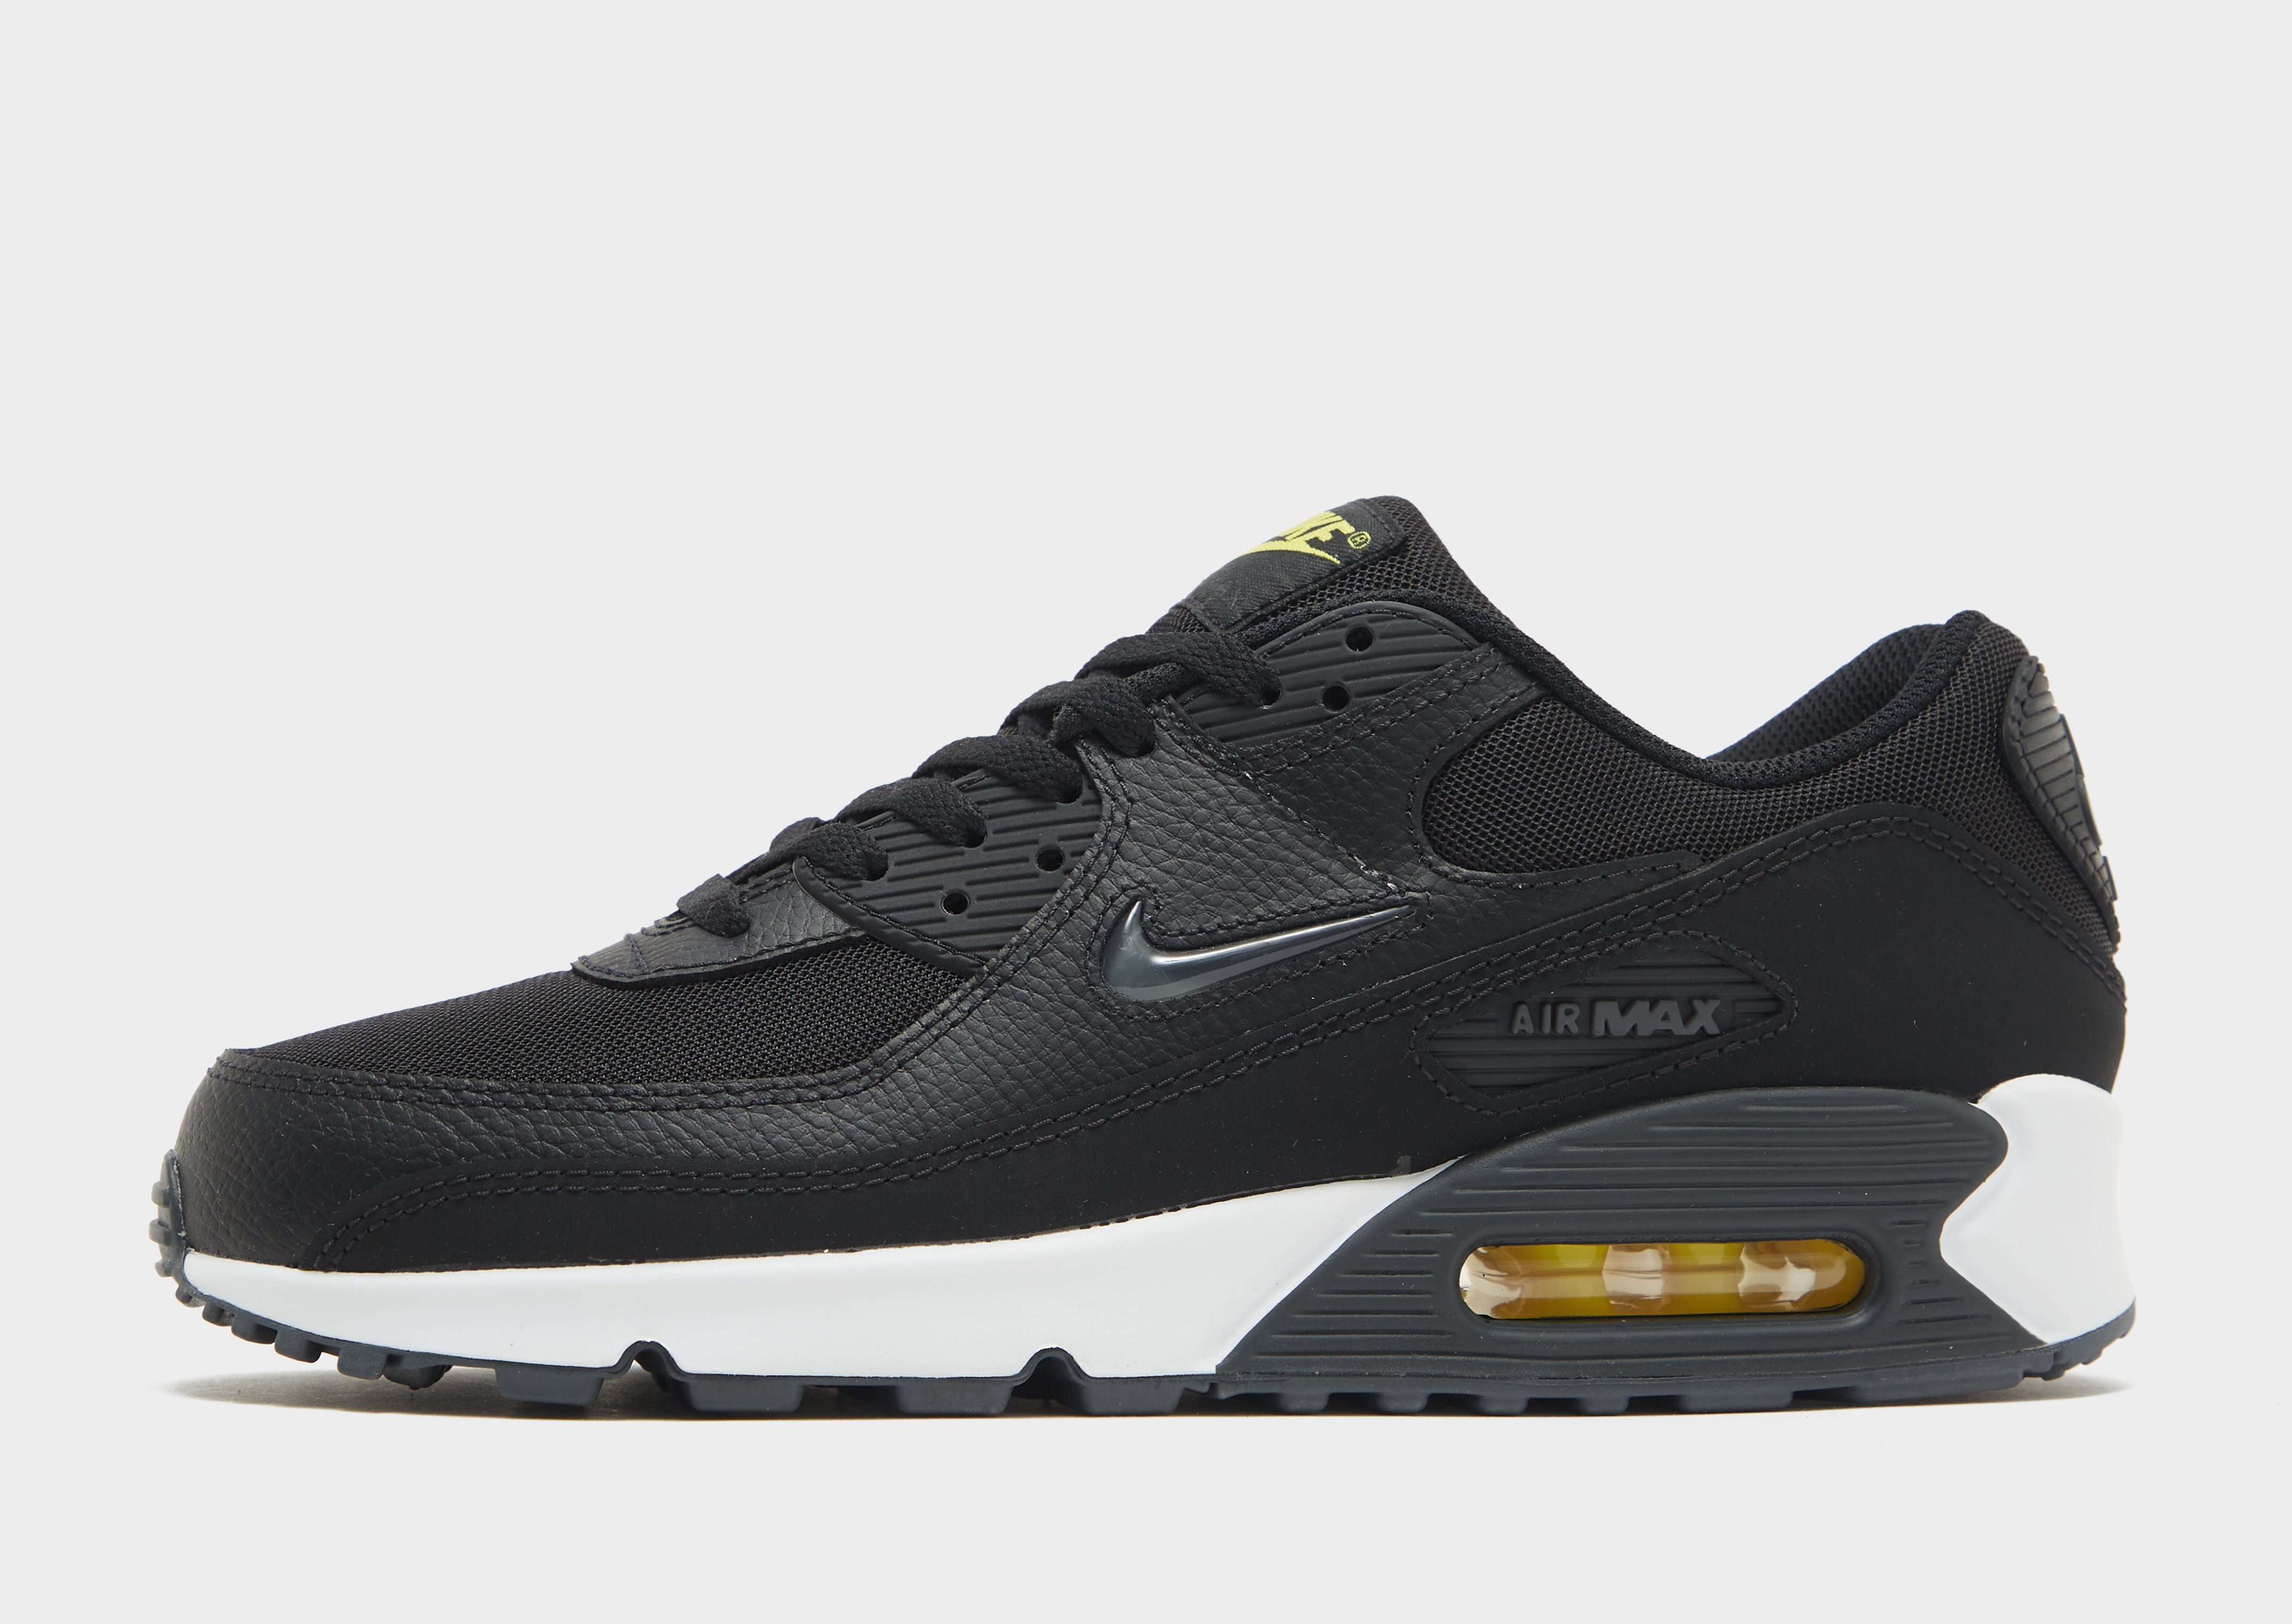 Golden State Warriors Nike Courtside Air Traffic Control Max90 T